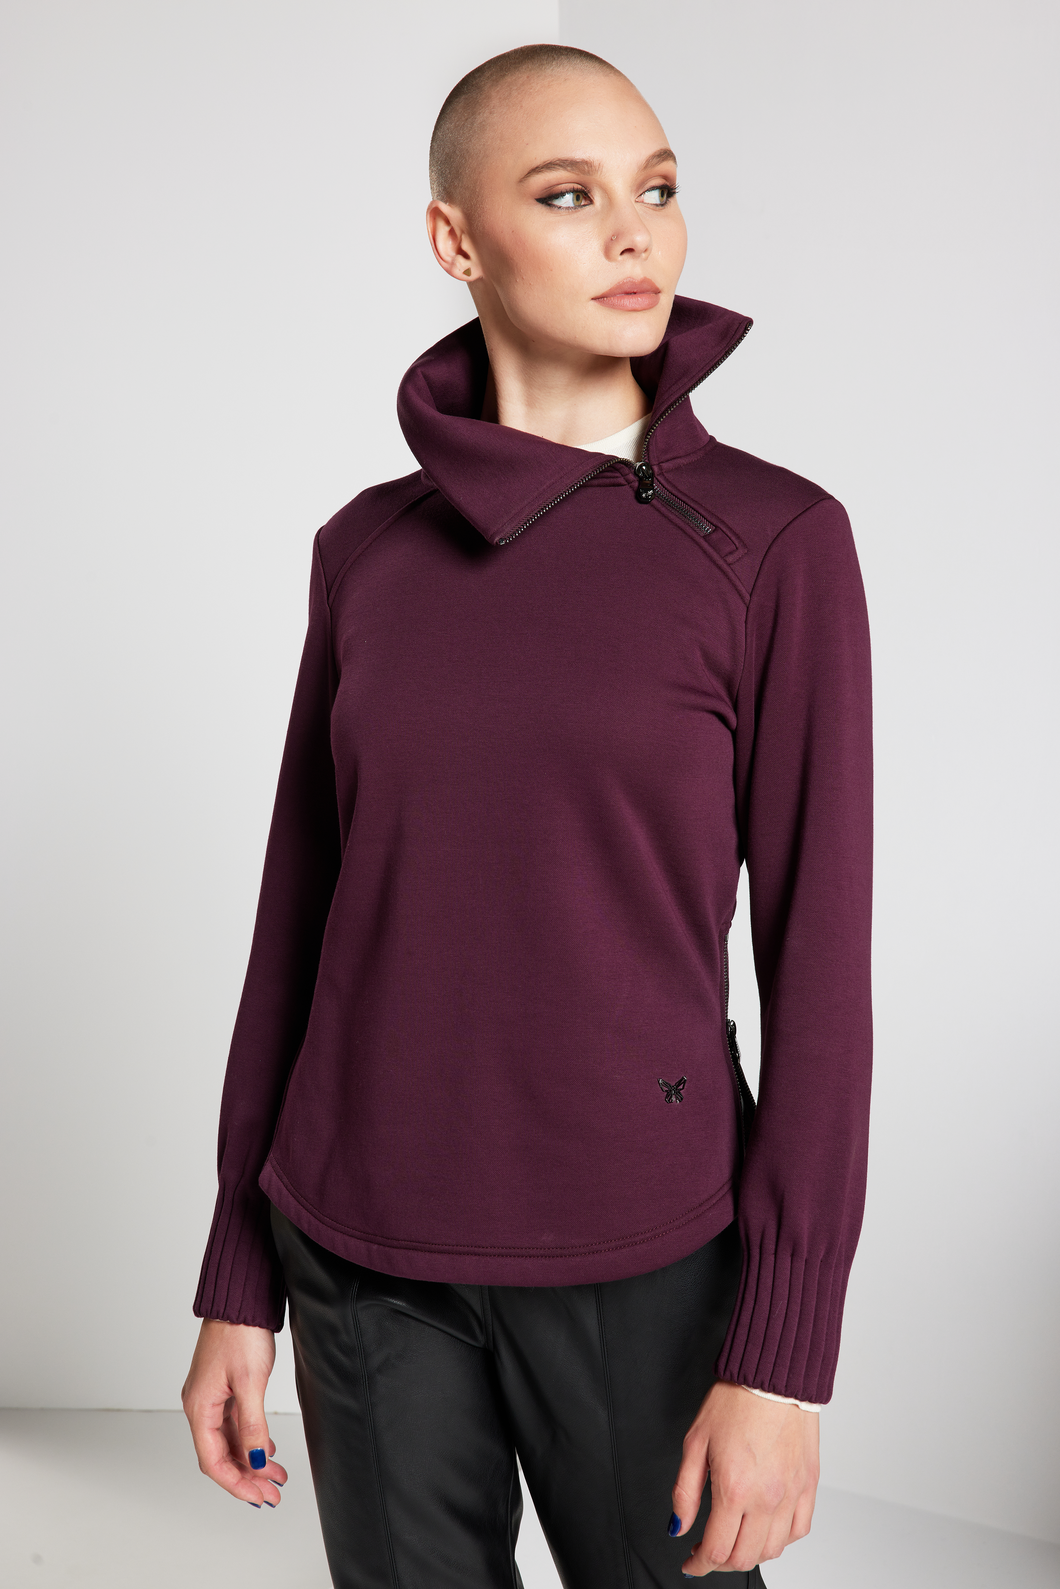 At Ease Pullover - Bordeaux